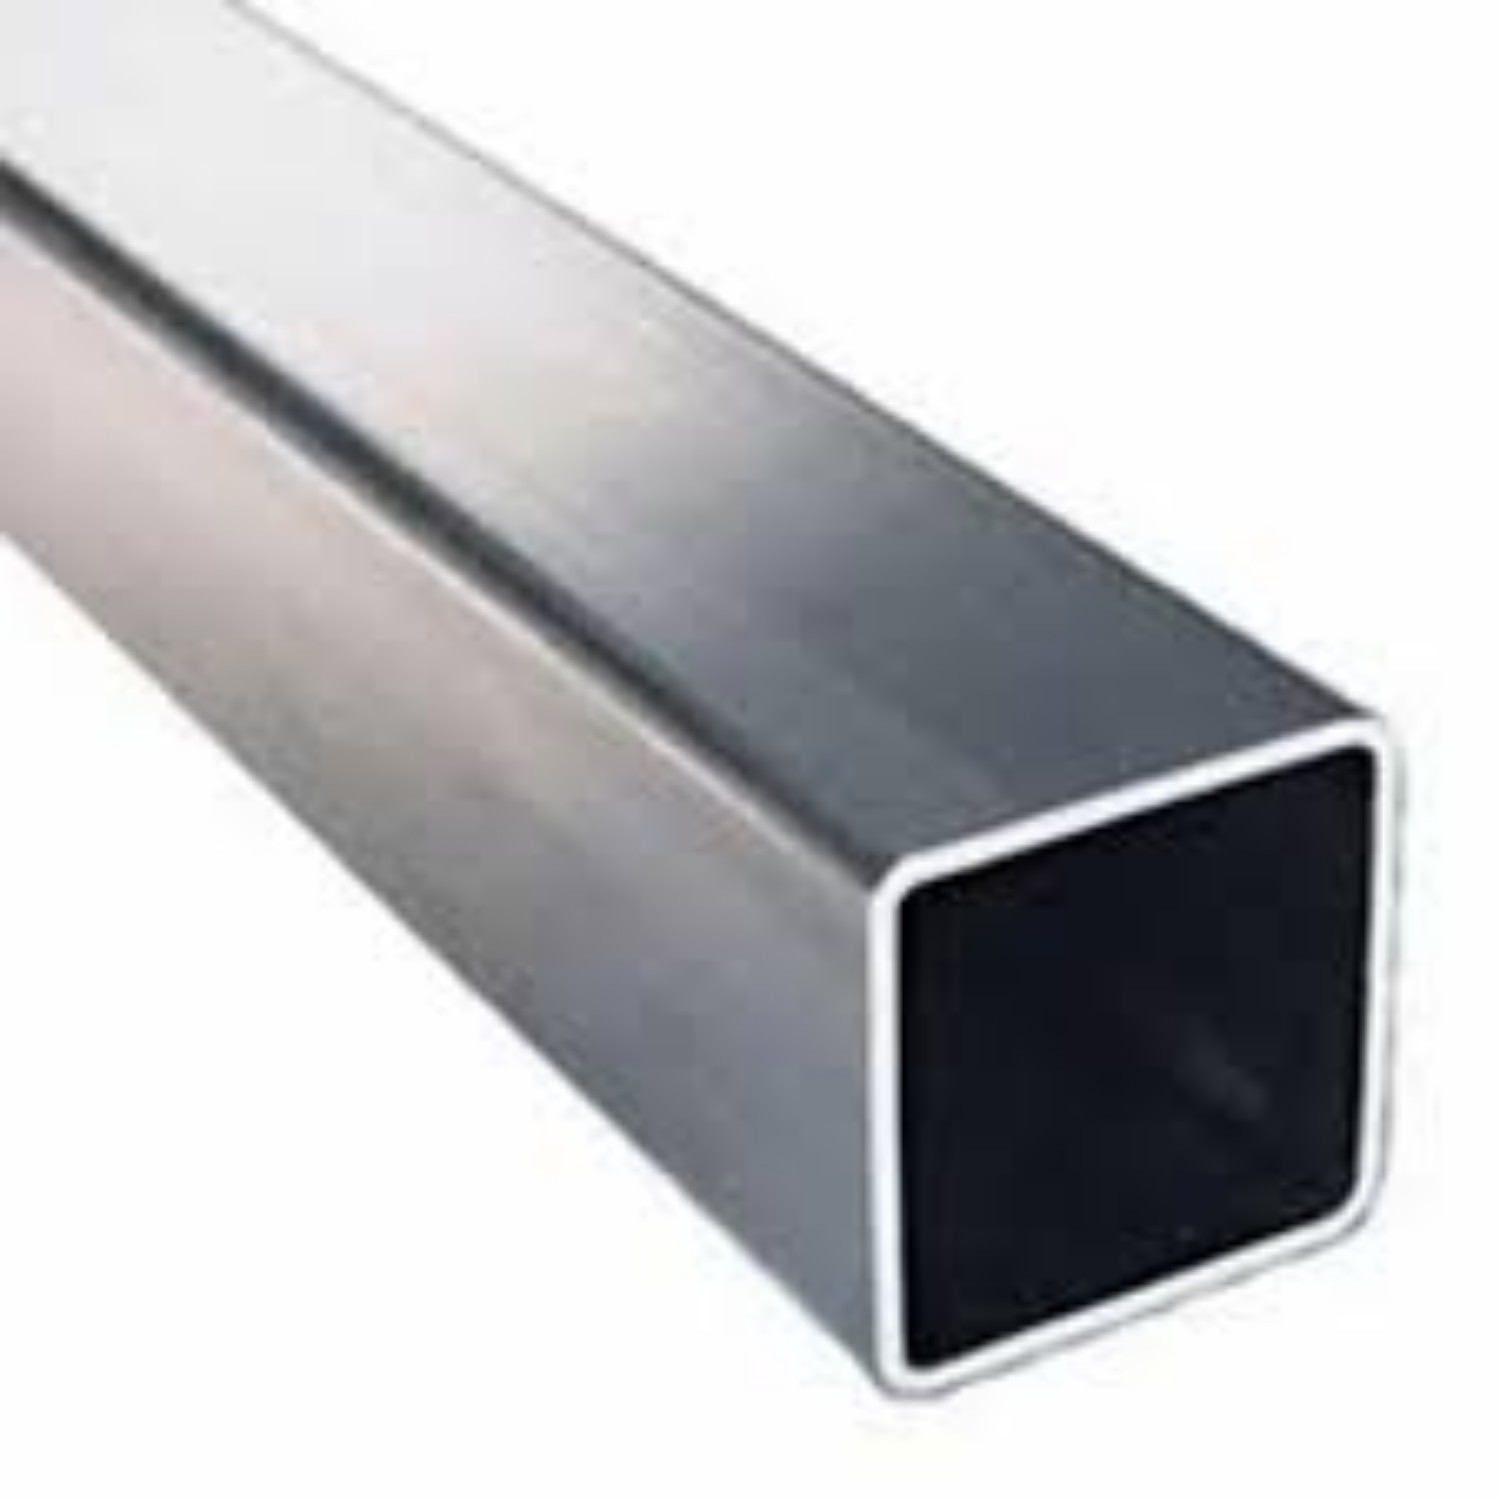 Generic 25 x 25 mm Square Carbon Steel Hollow Section 1.5 mm YST-240 1.12 kg/m_0